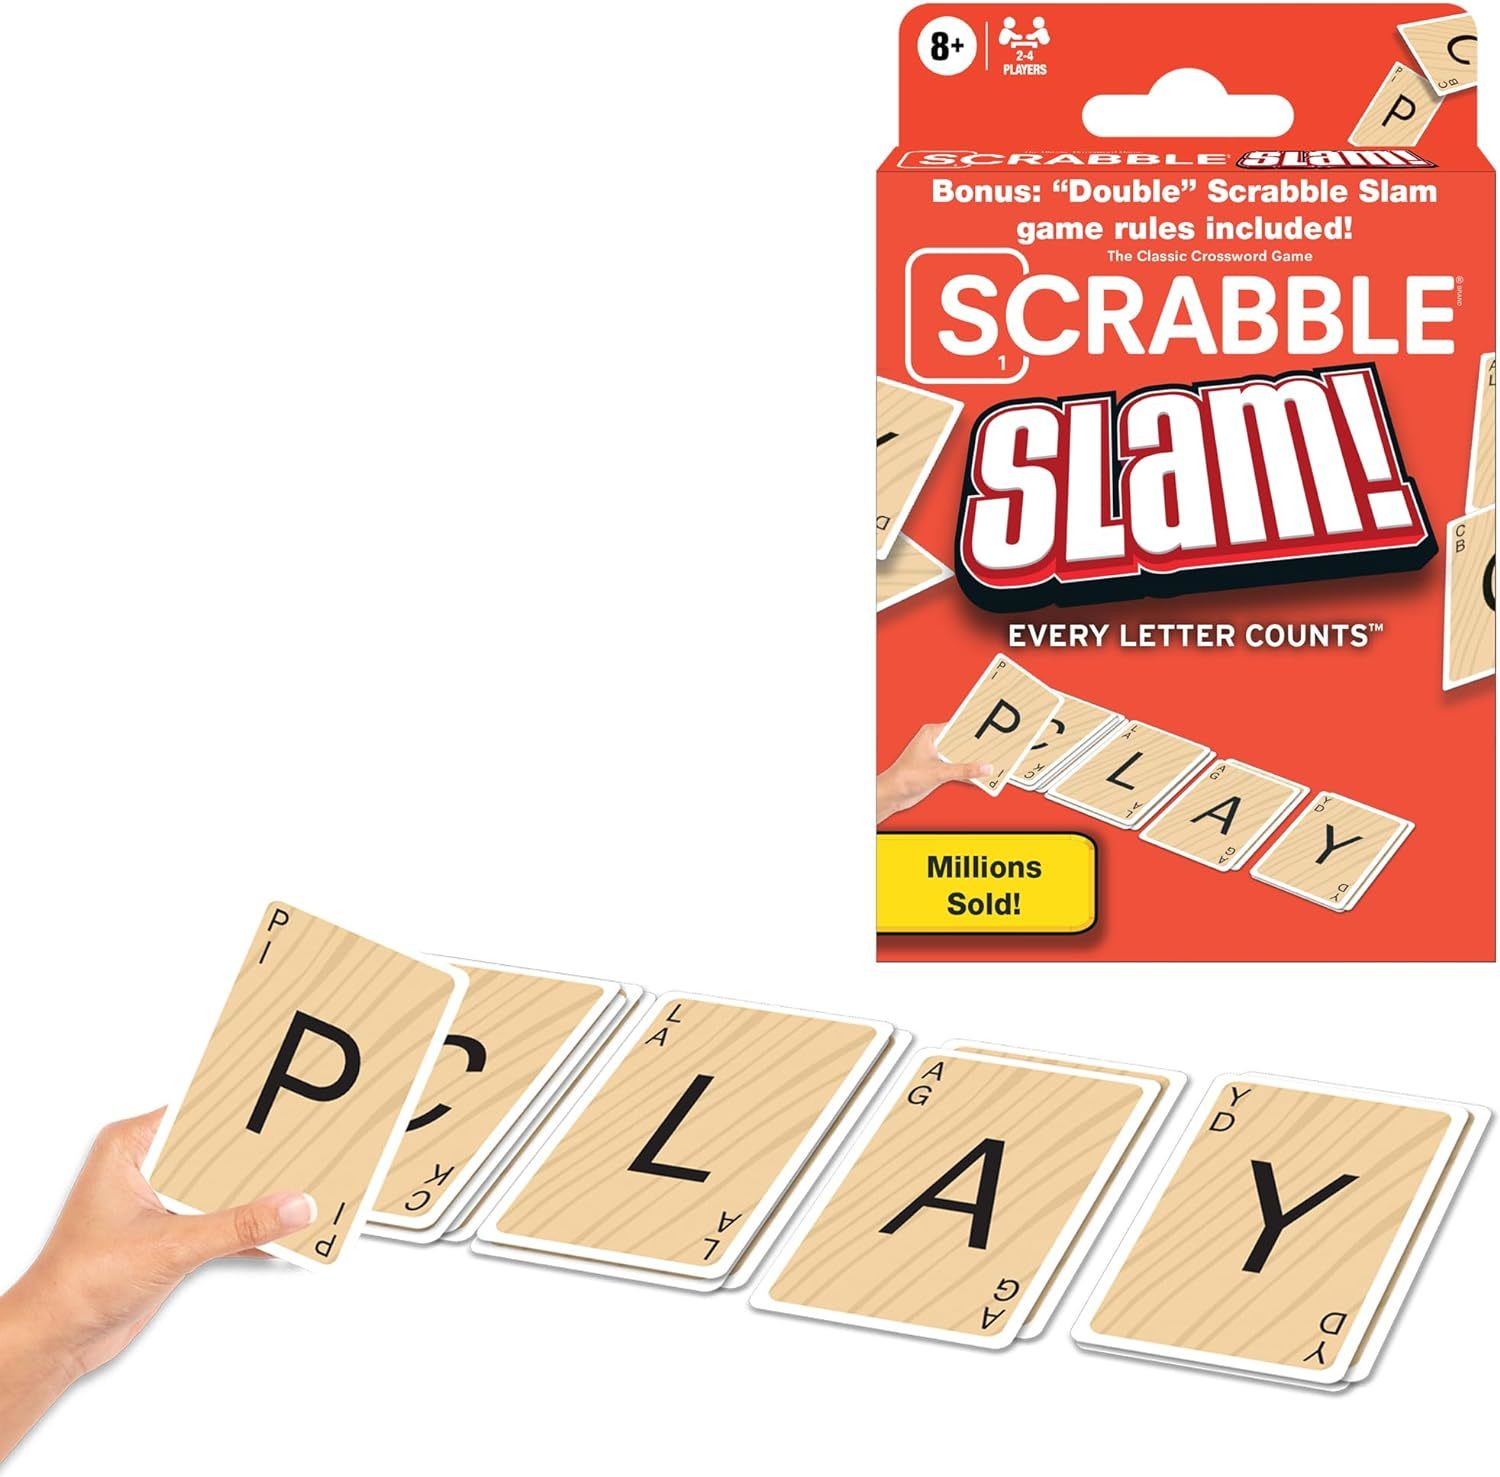 Scrabble Slam The 2000's Mega Hit Scrabble Card Game USA Fast Paced Card Game Ve - $20.04